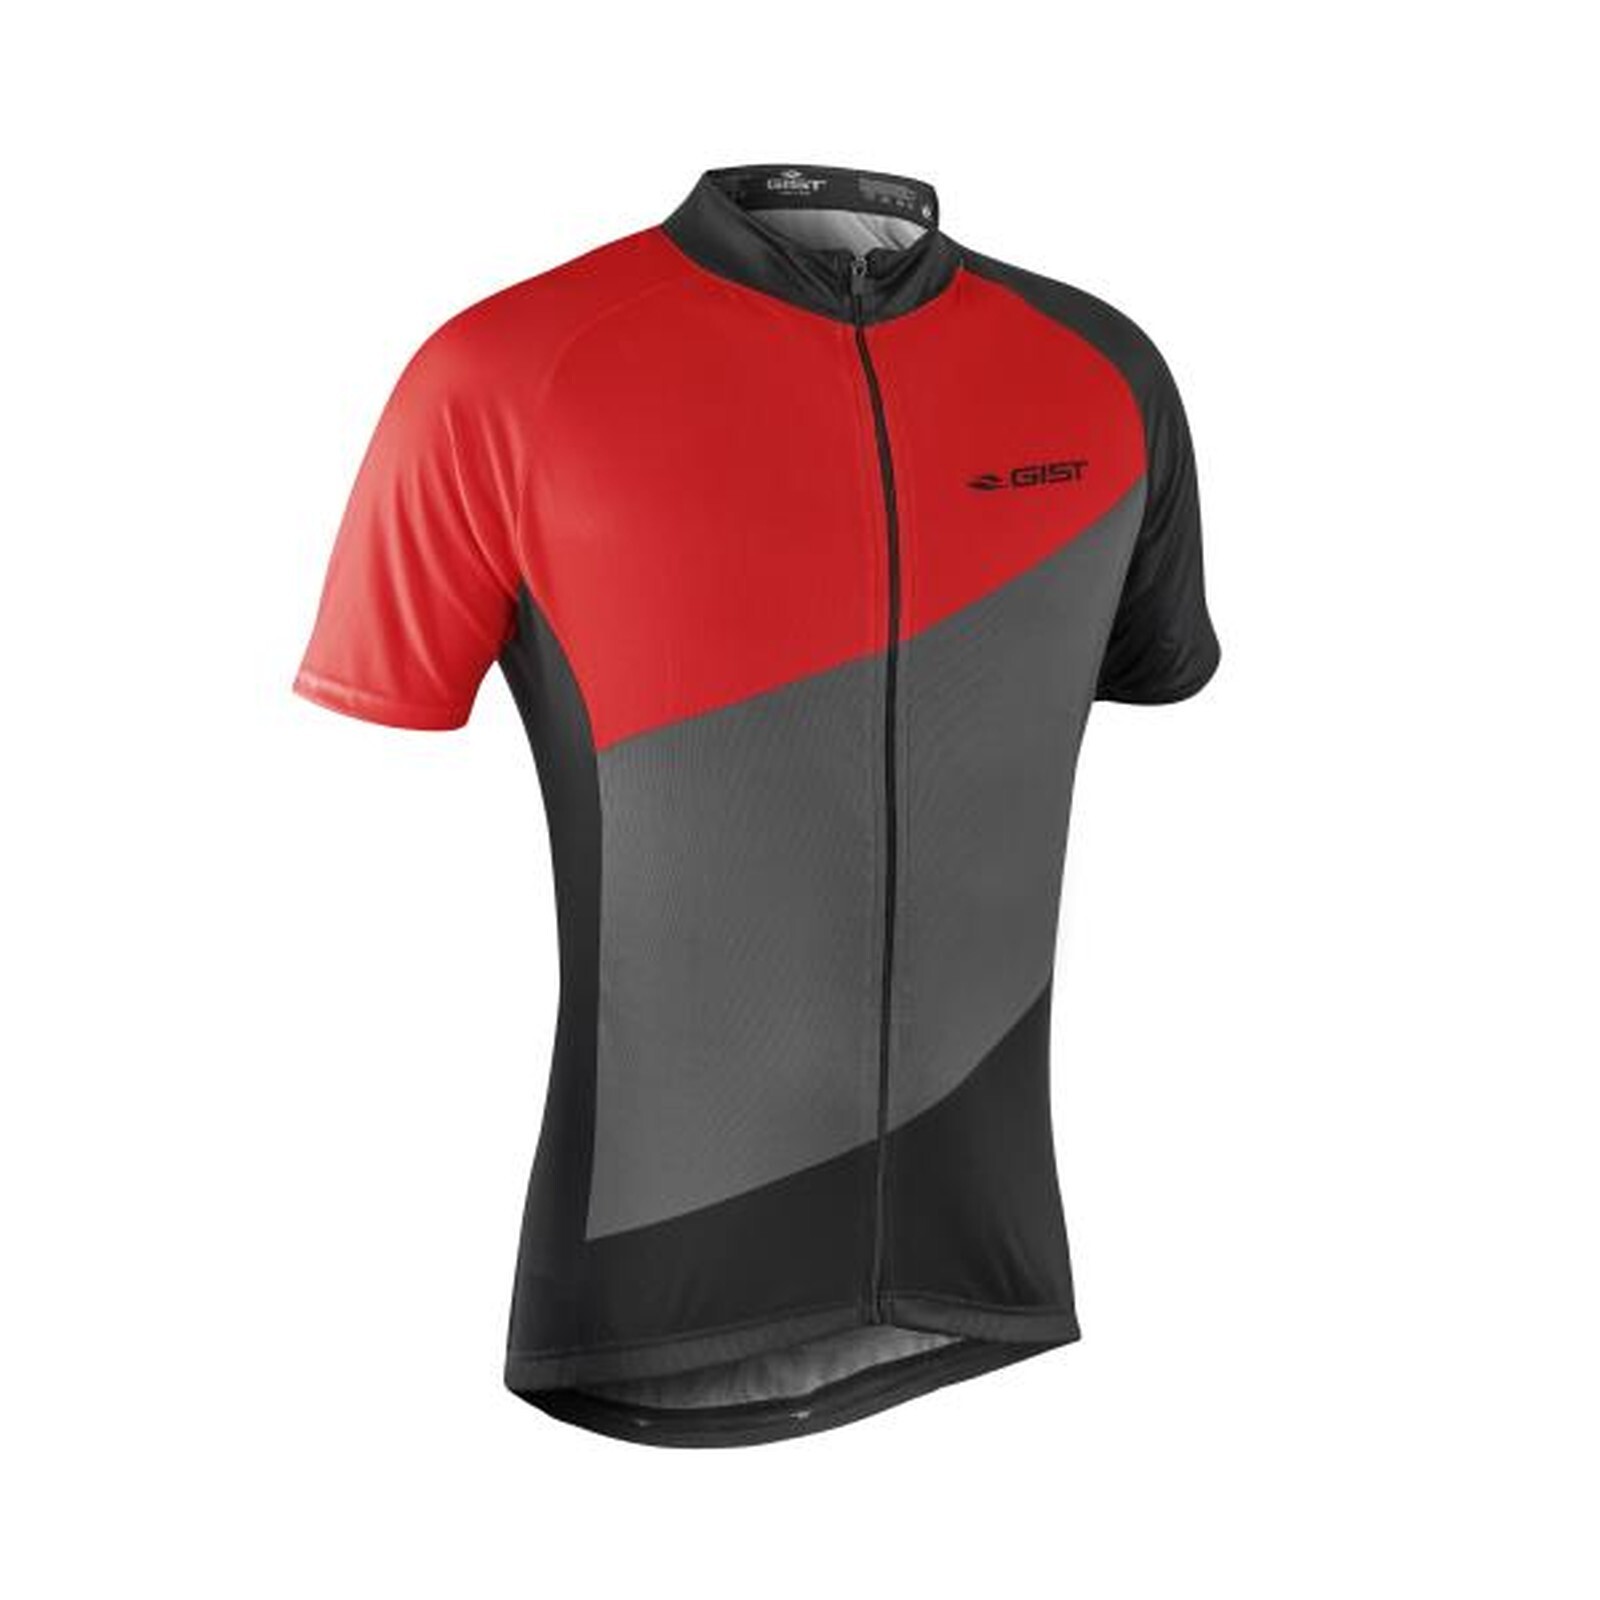 GIST FLOW jersey and bib shorts Set Red